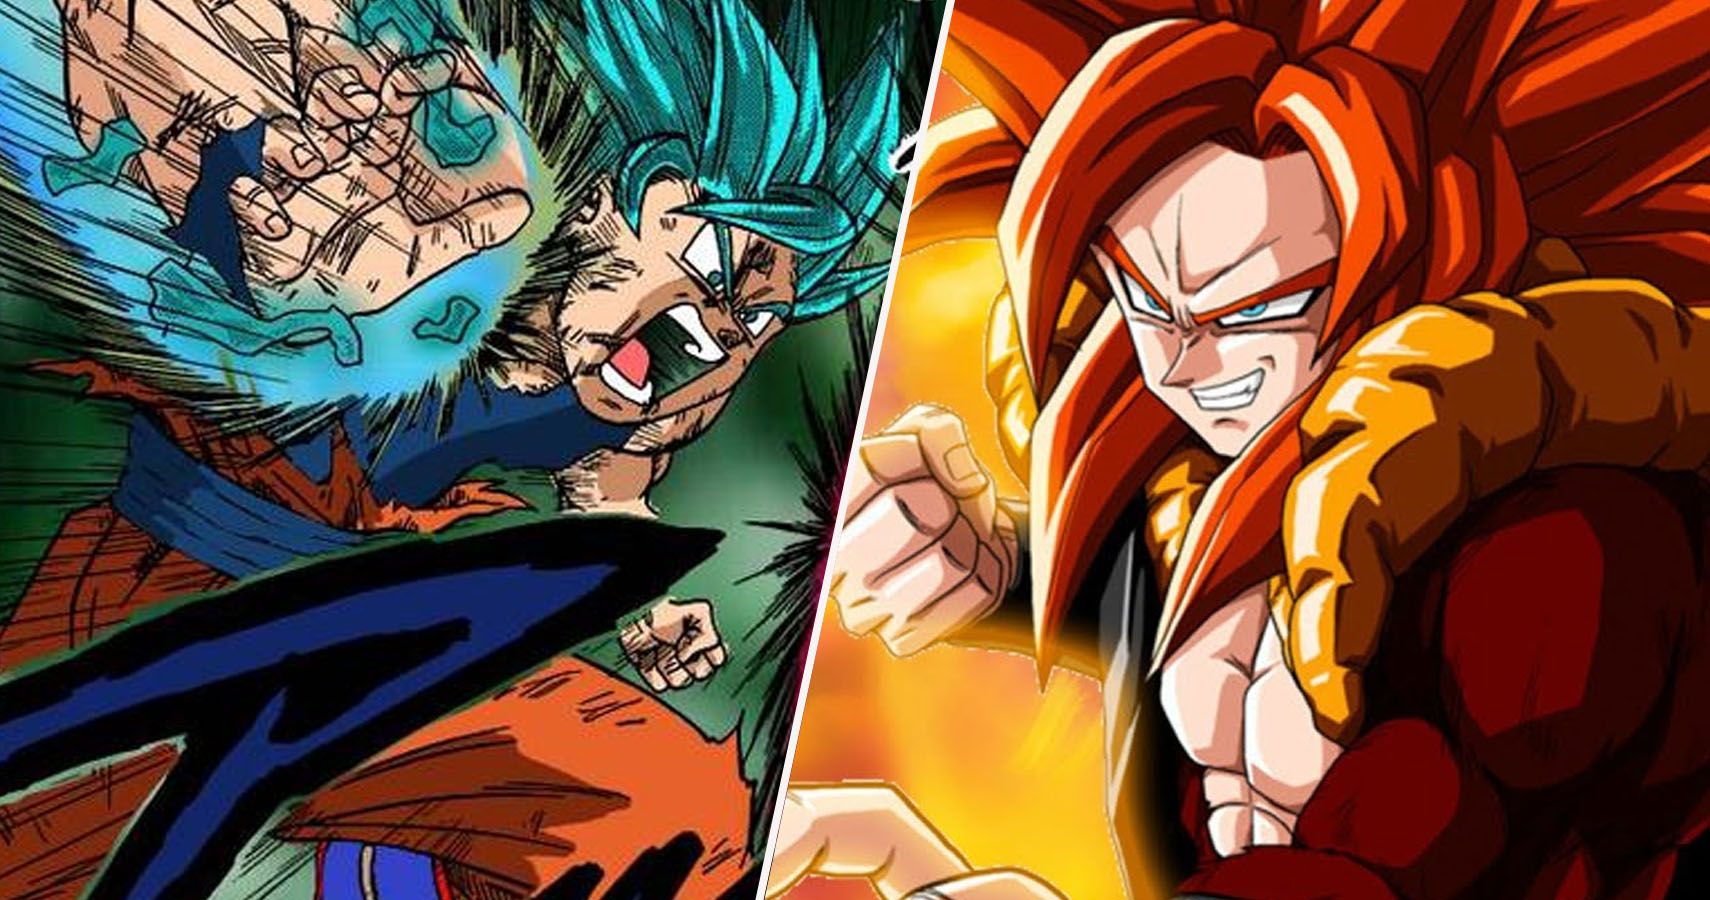 Dragon Ball Super is Combining Goku's Two Most Powerful Transformations